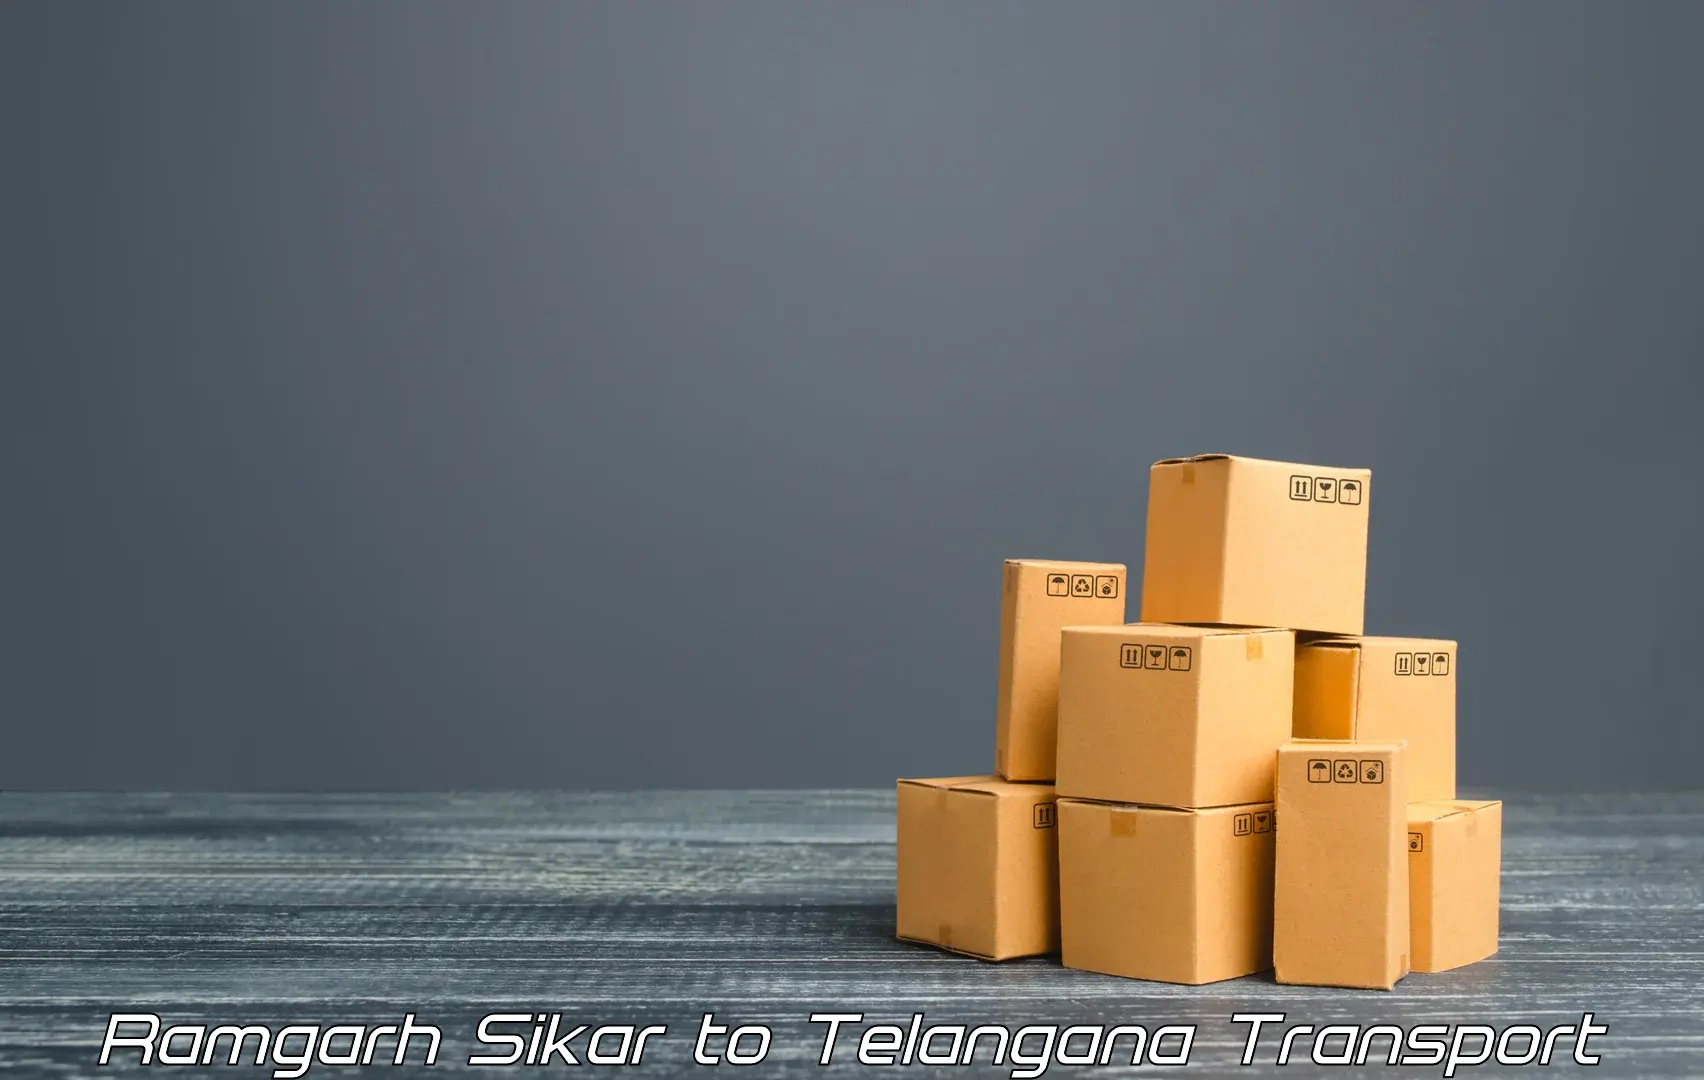 Air cargo transport services in Ramgarh Sikar to Tandur